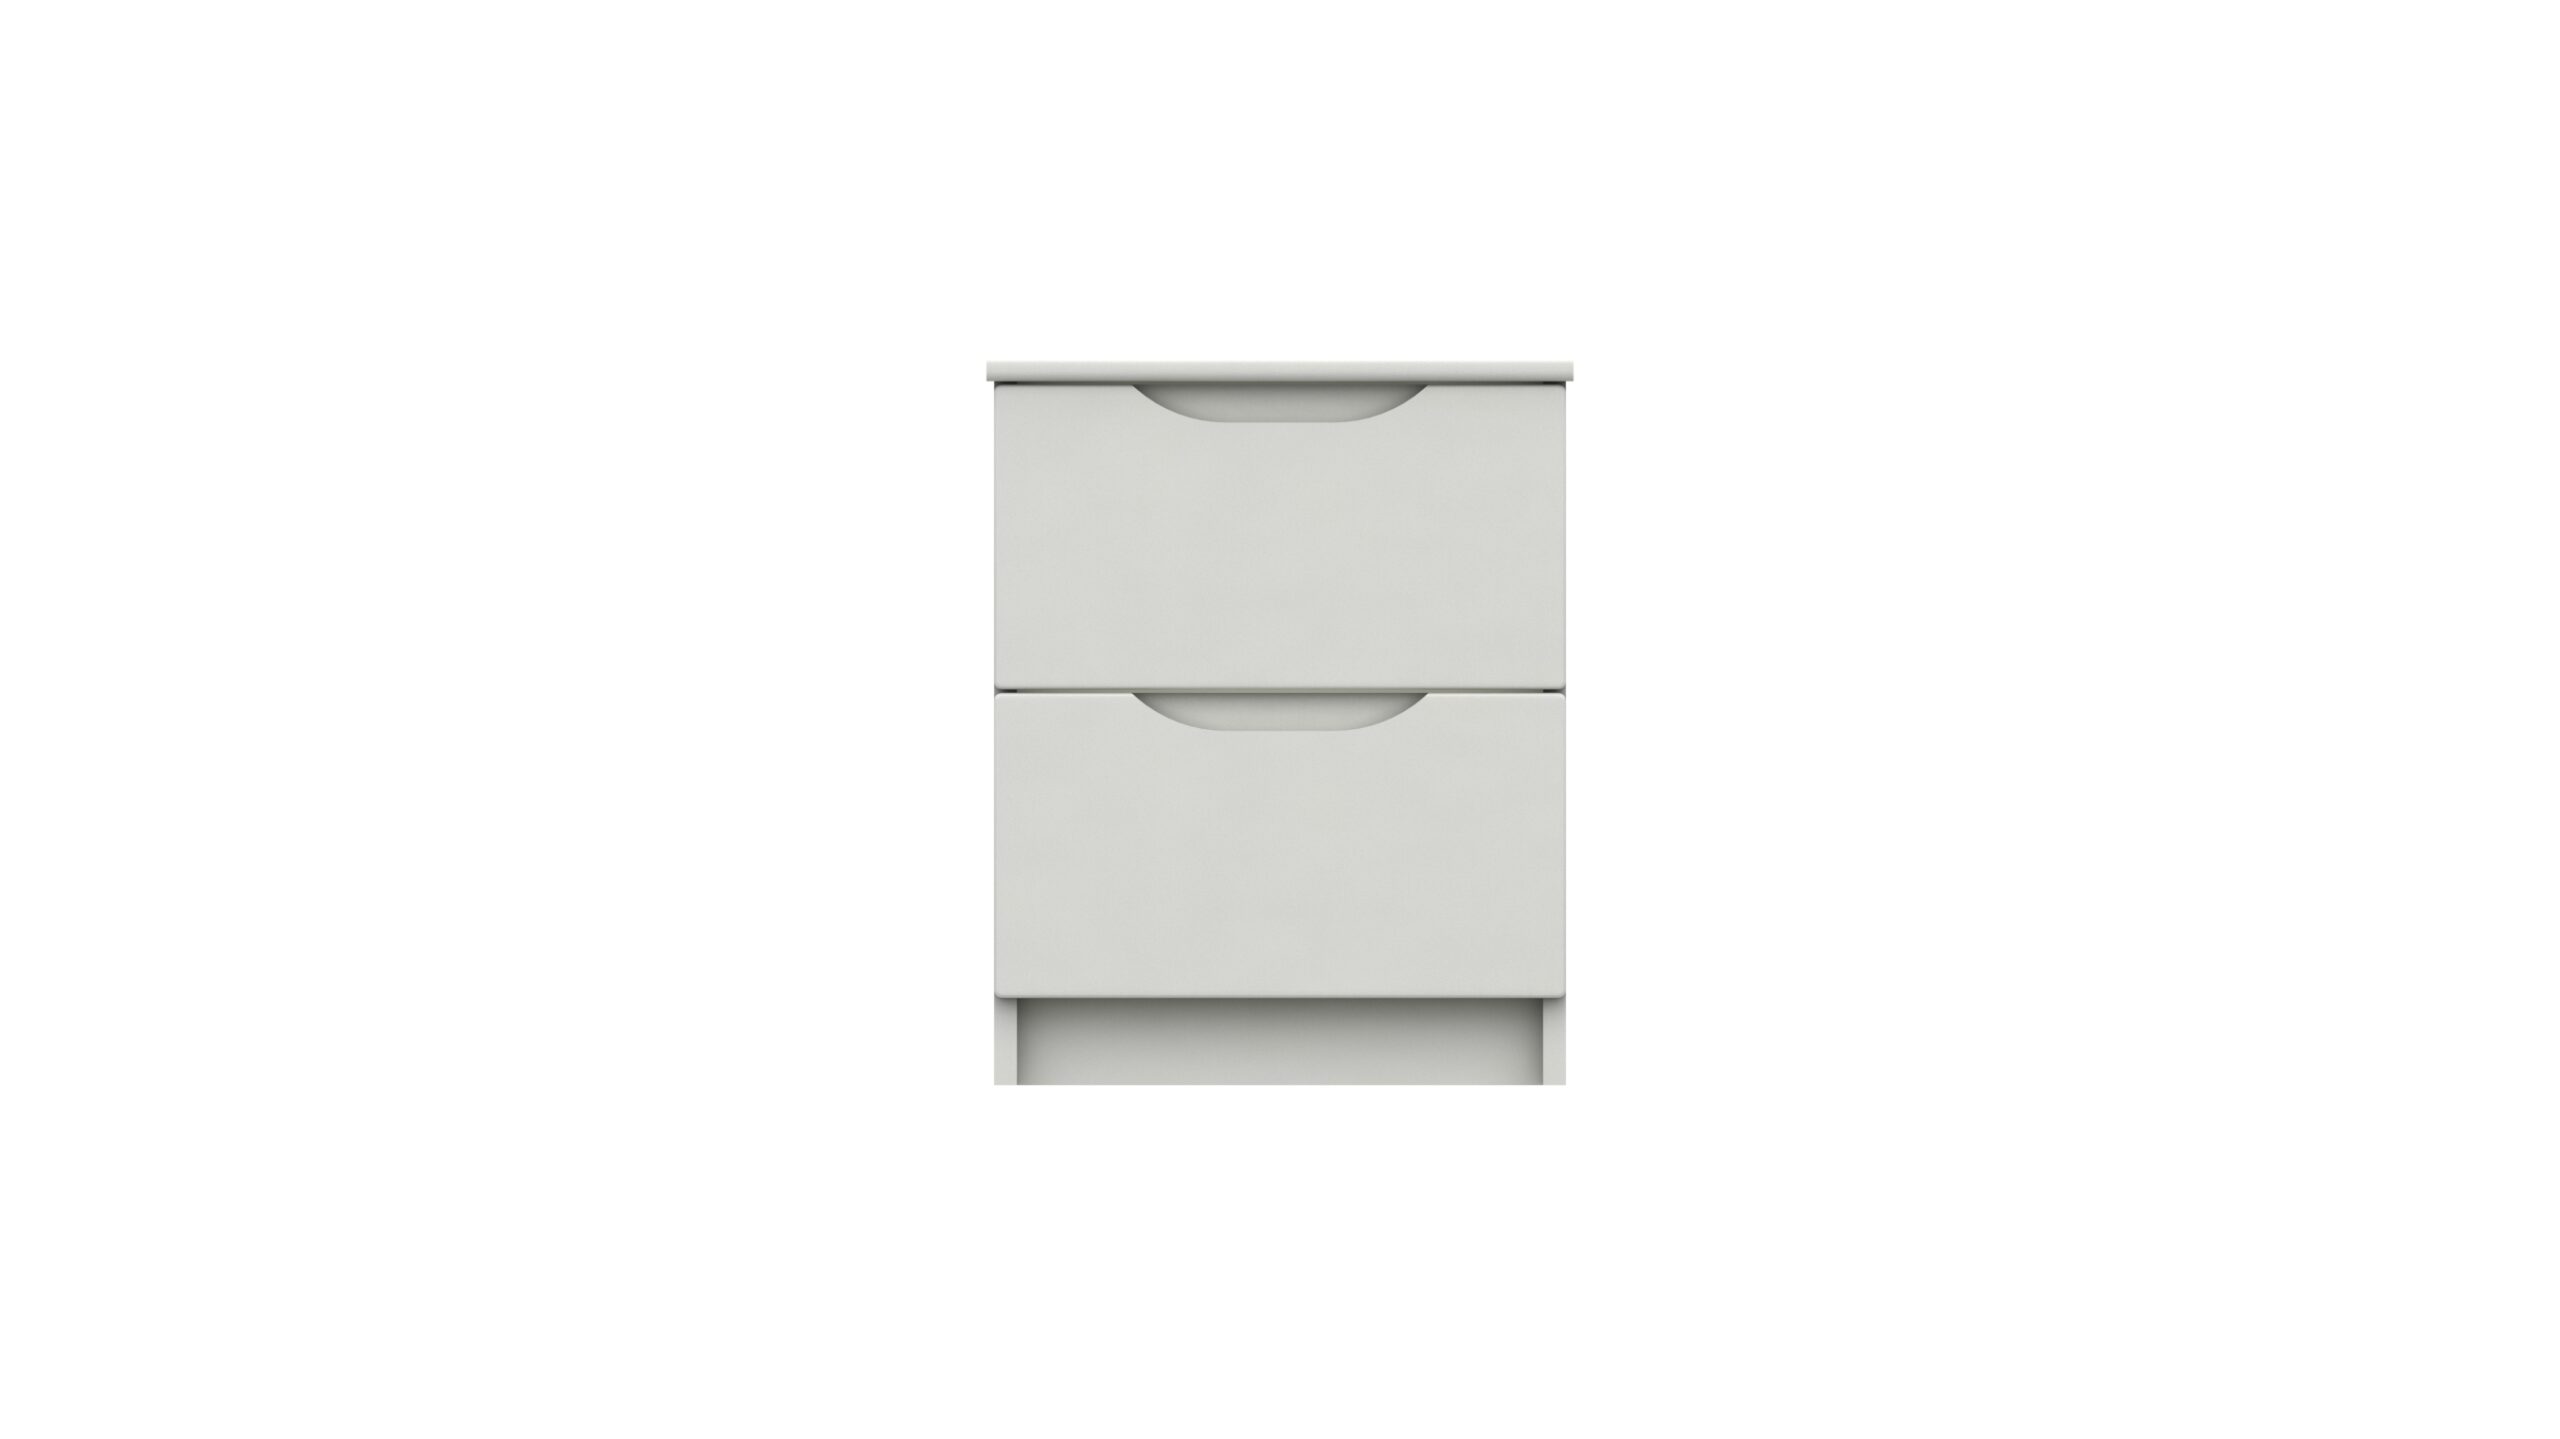 Sinata Gloss Two Drawer Bedside Table - White Gloss